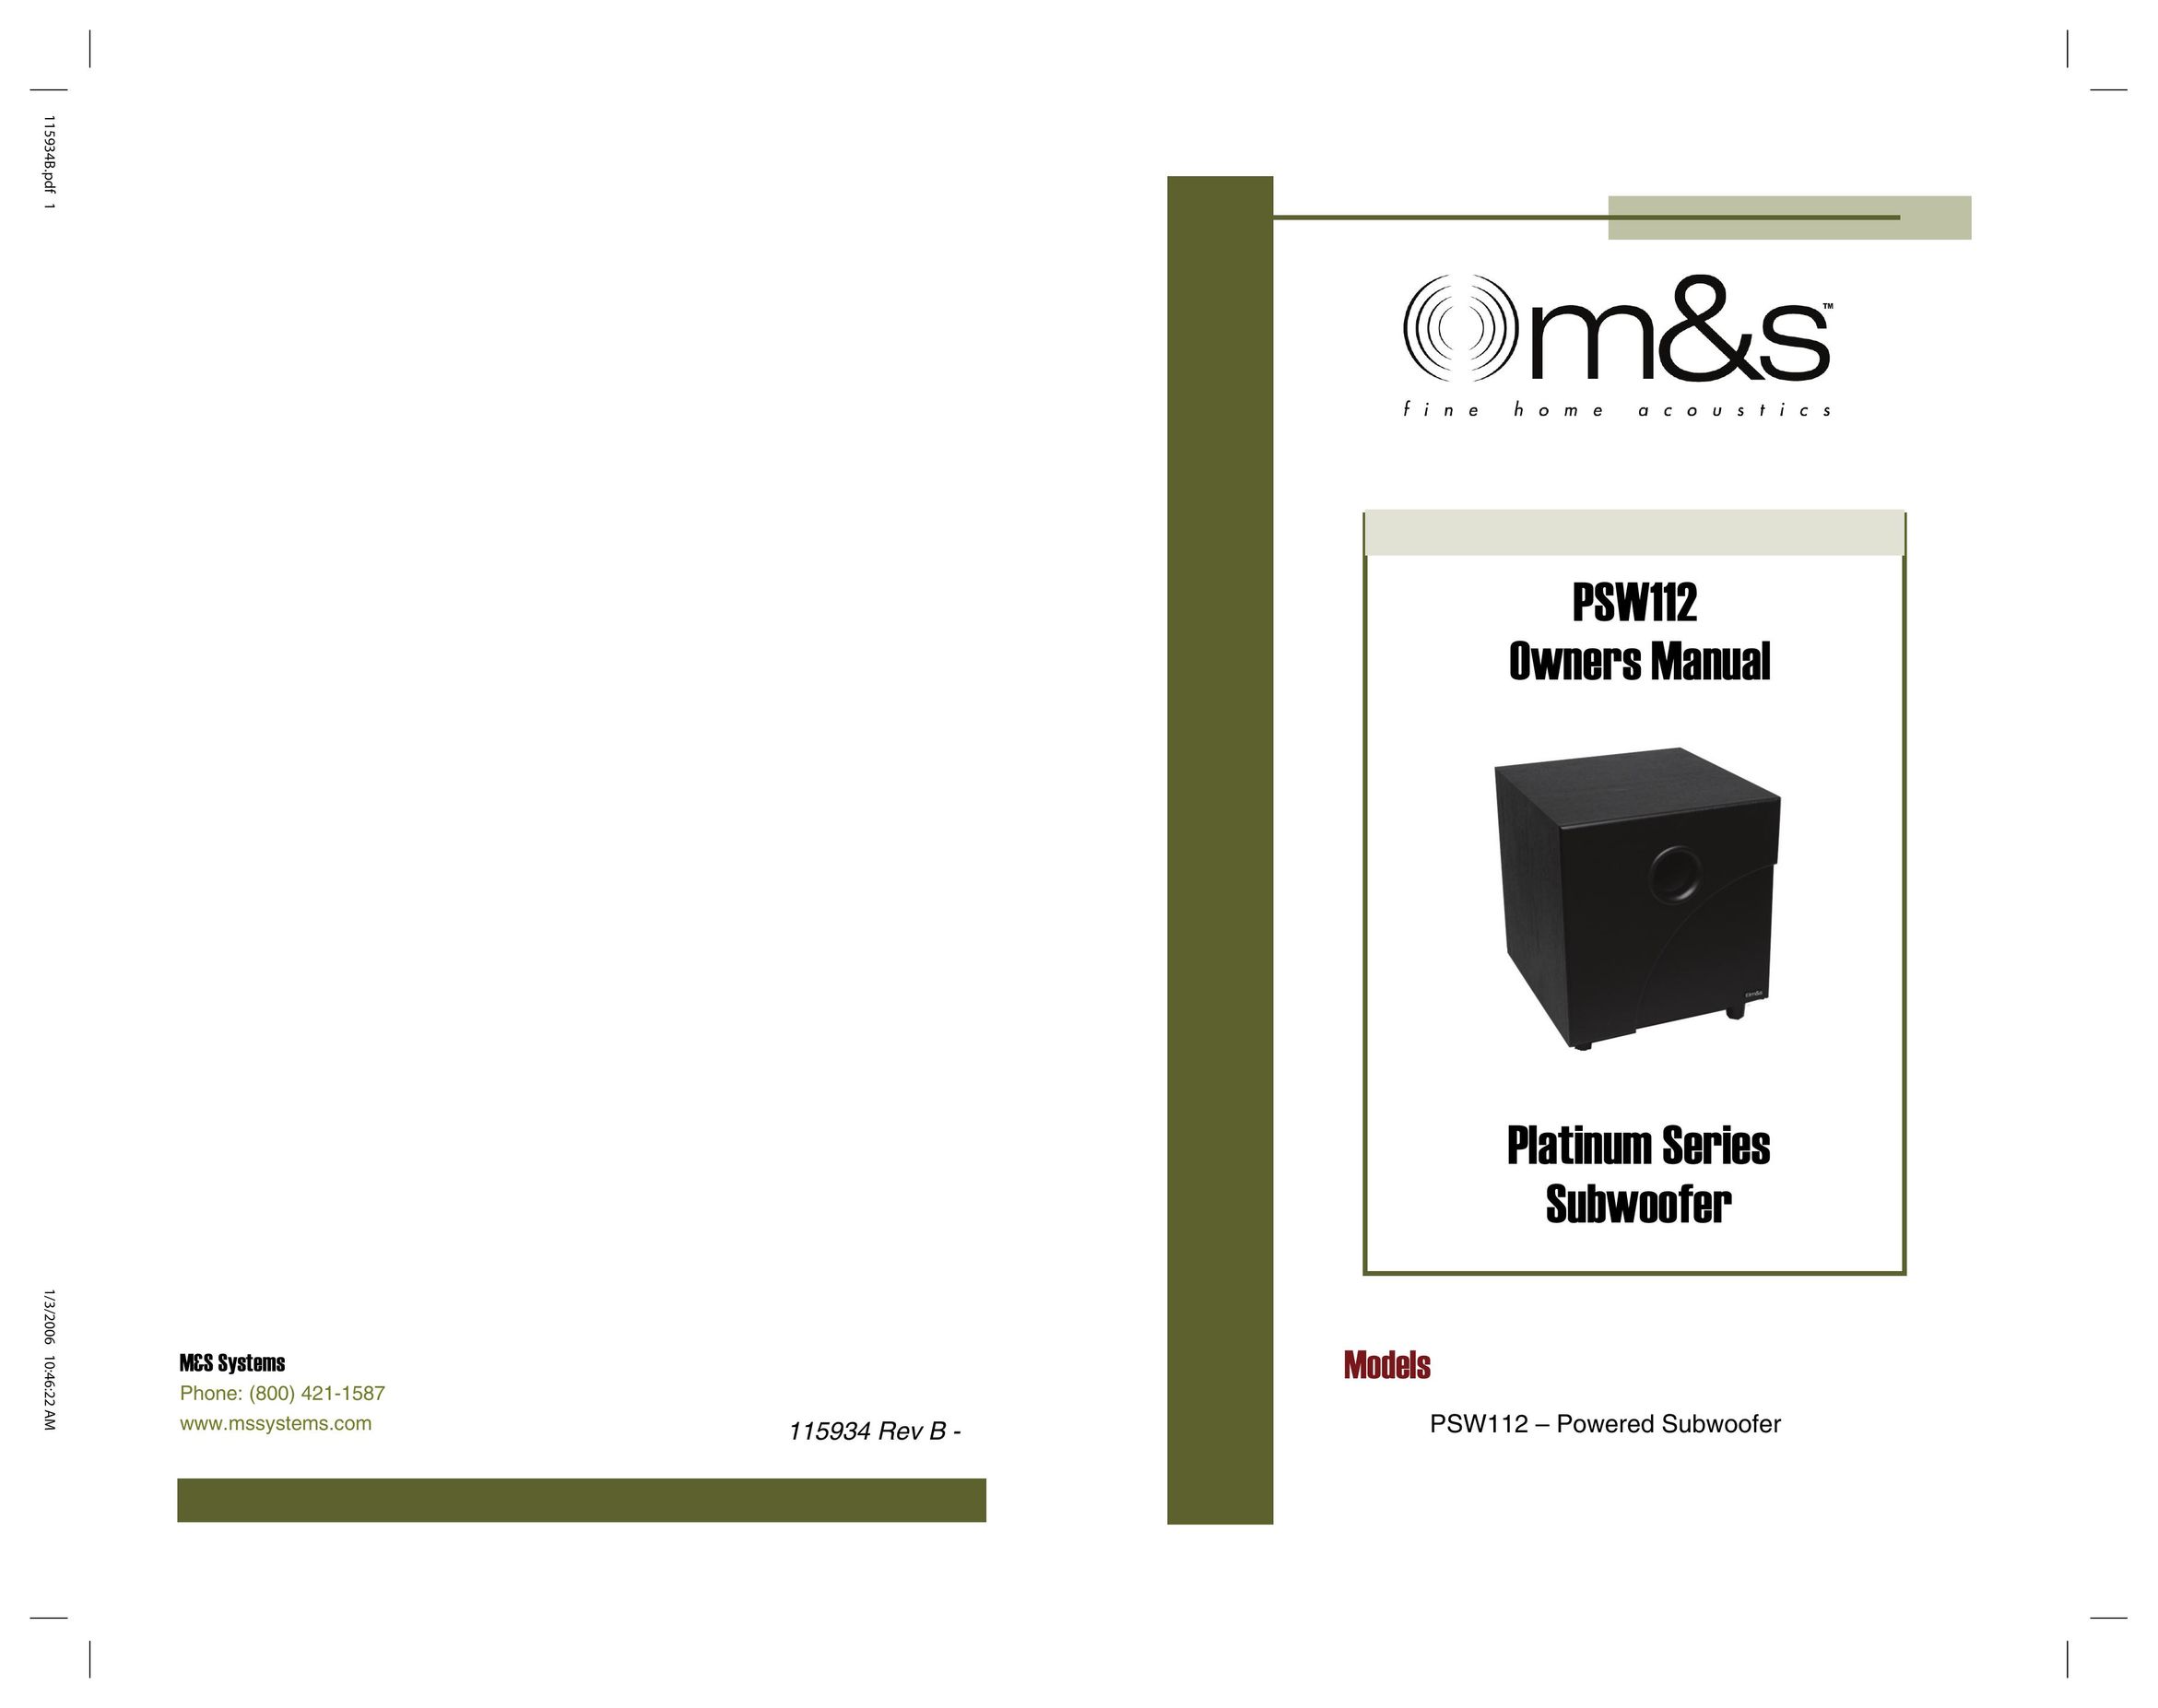 M&S Systems PSW112 Speaker User Manual (Page 1)